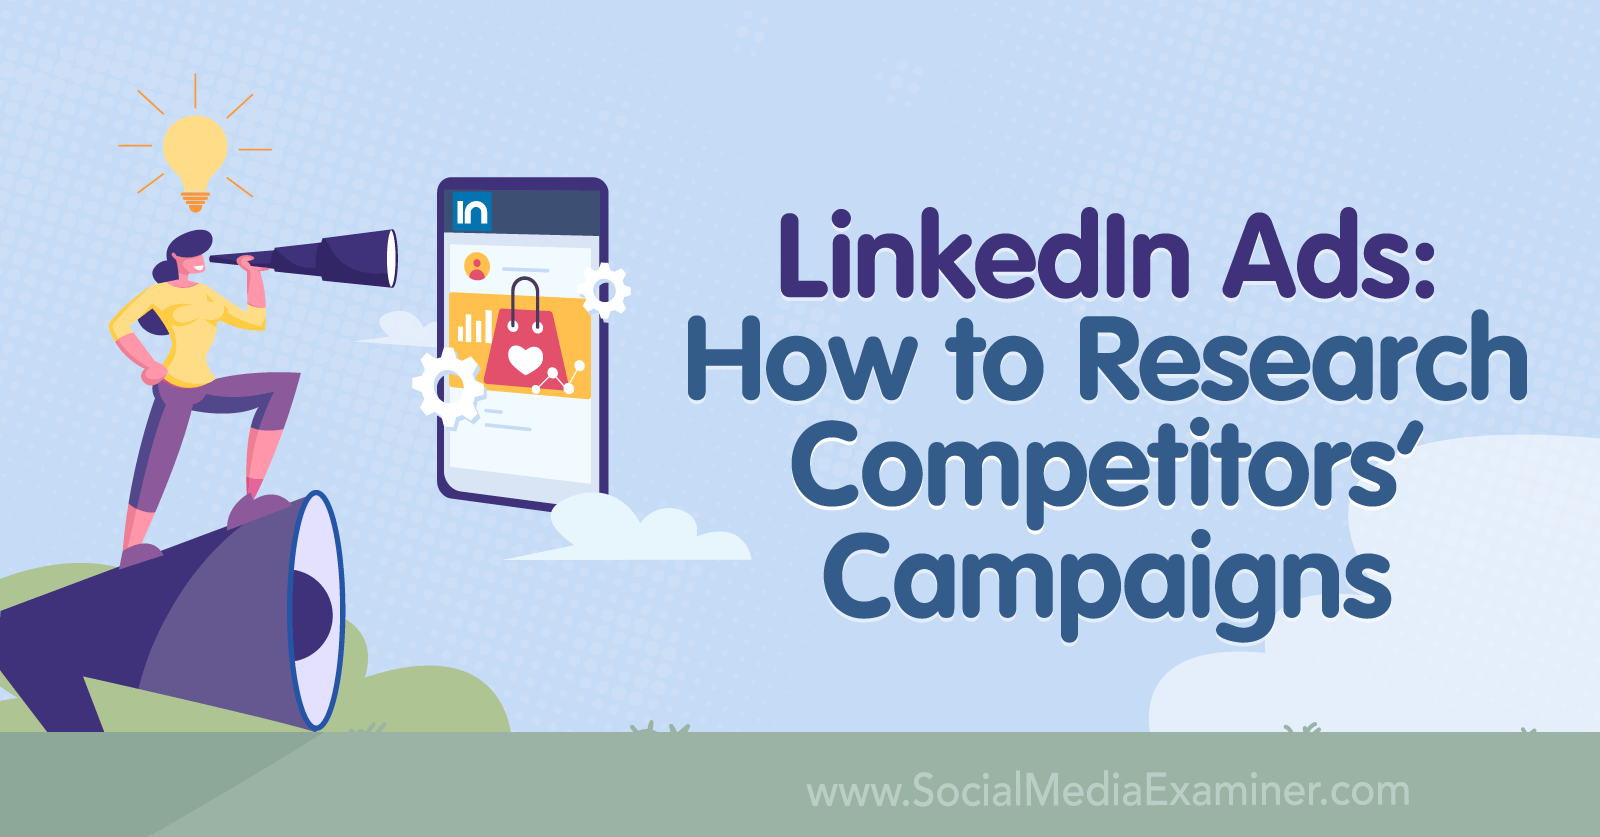 LinkedIn Ads: How to Research Competitors’ Campaigns-Social Media Examiner